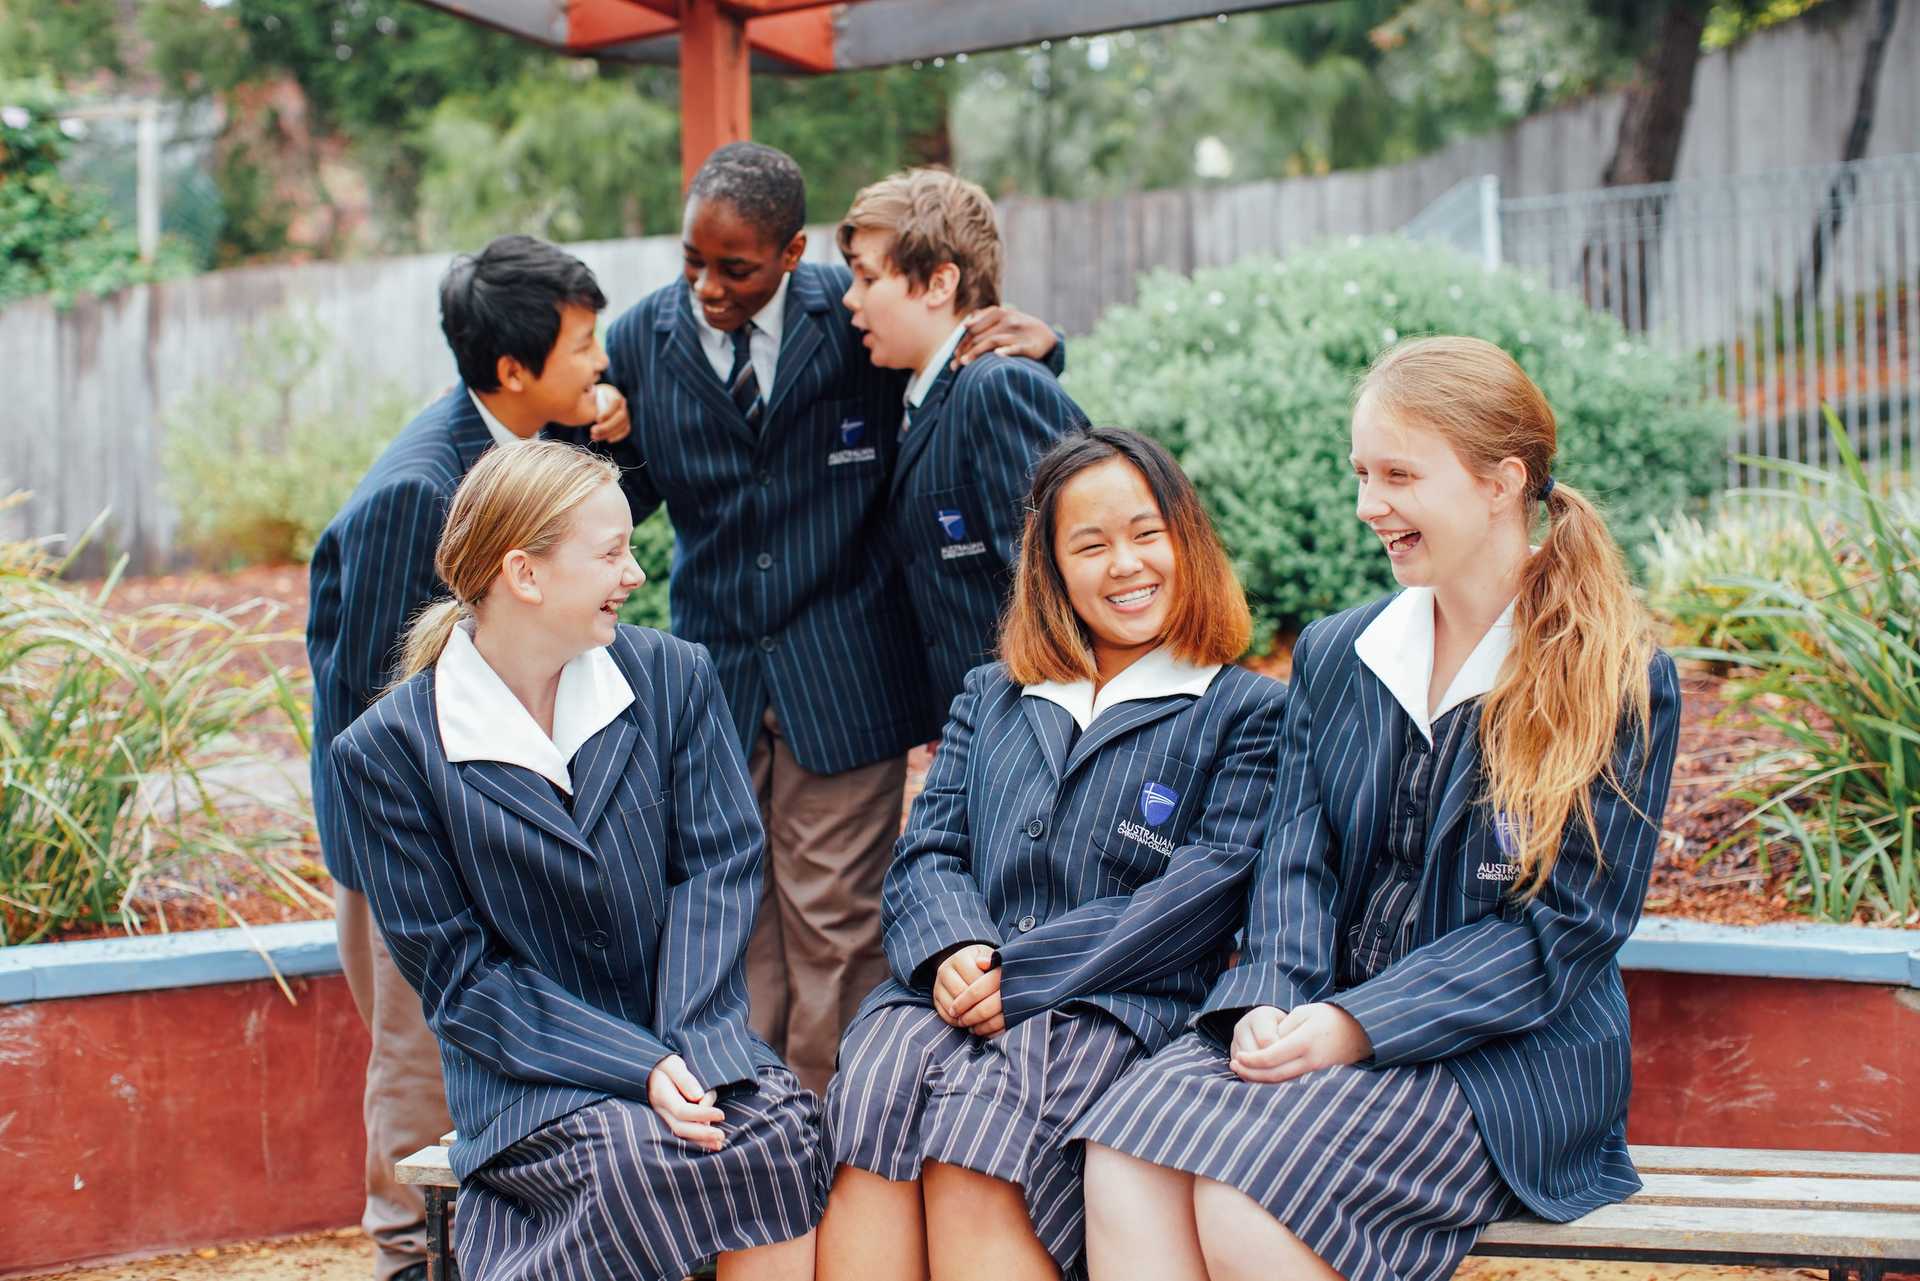 What does it mean to be a Christian school?